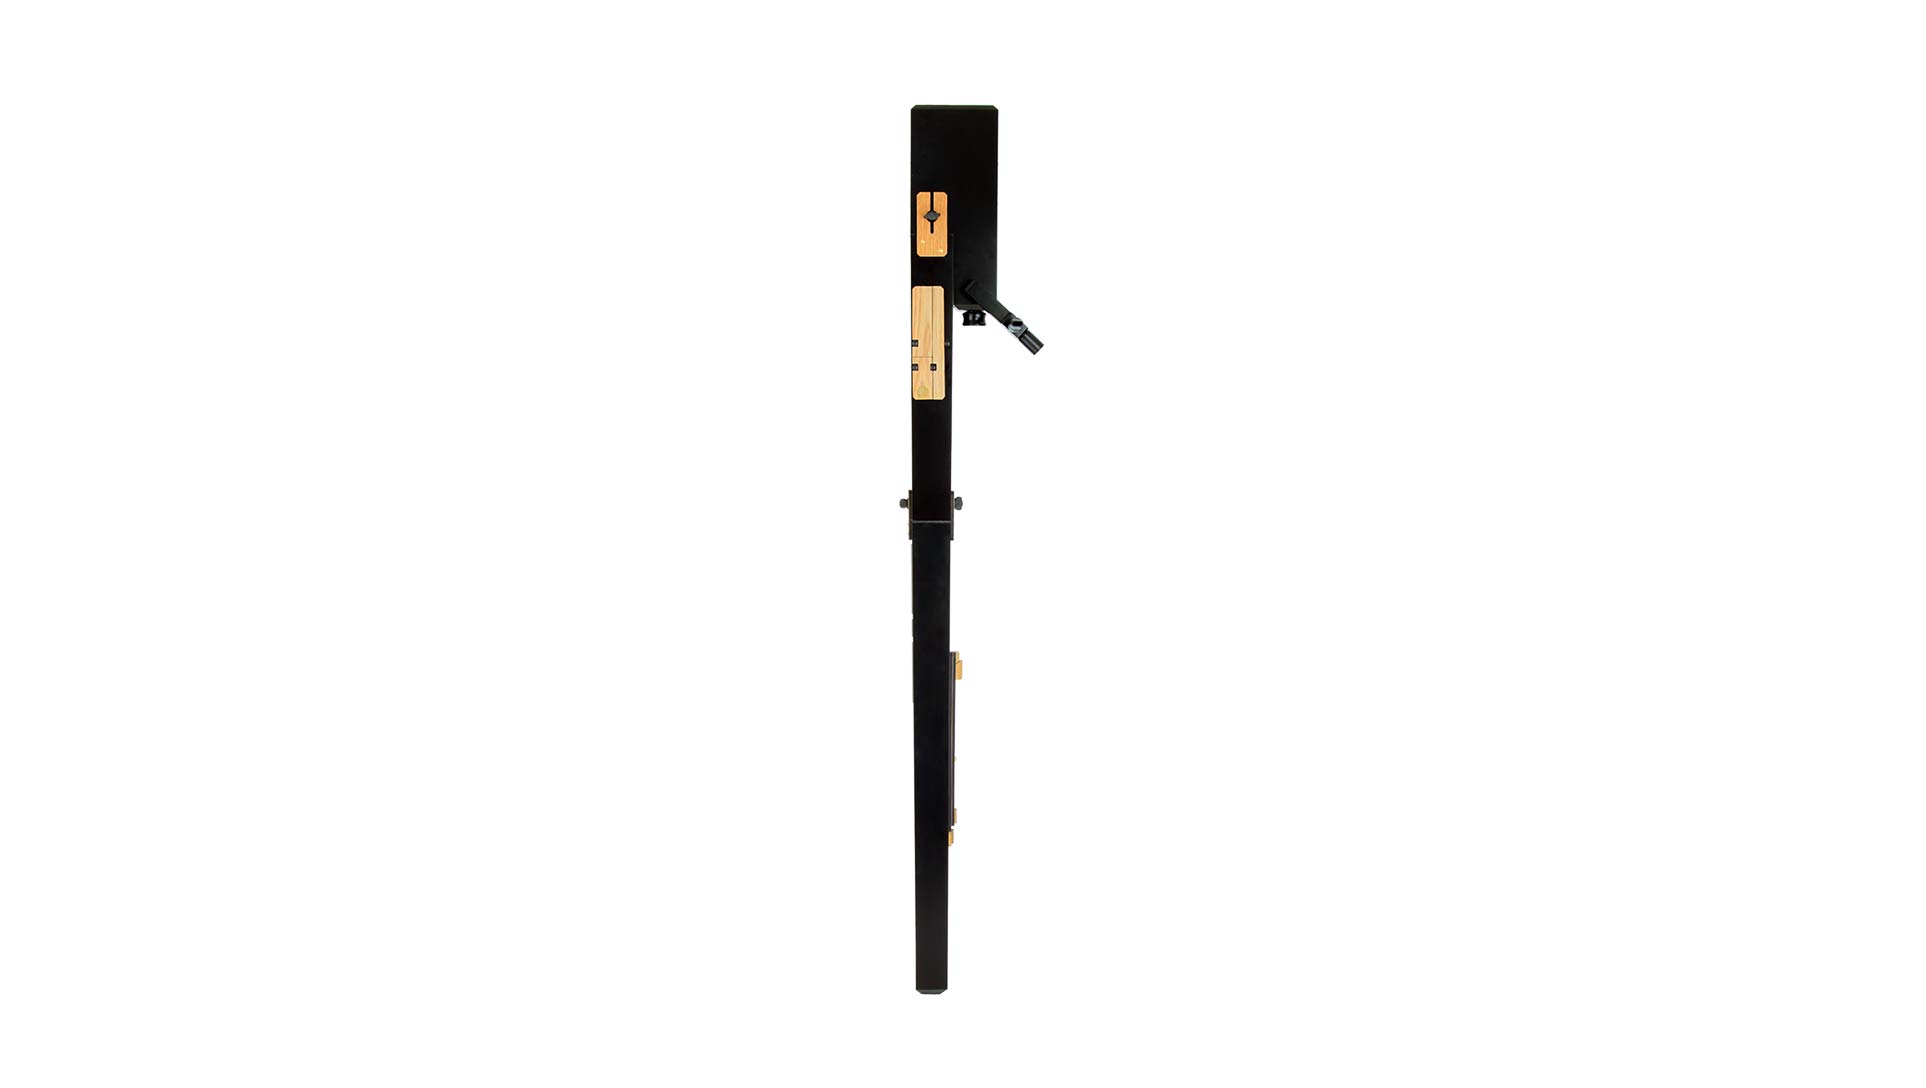 Paetzold by Kunath, "Solo", "HP Original" contrabass recorder in f', 442 Hz, RESONA synthetic mater